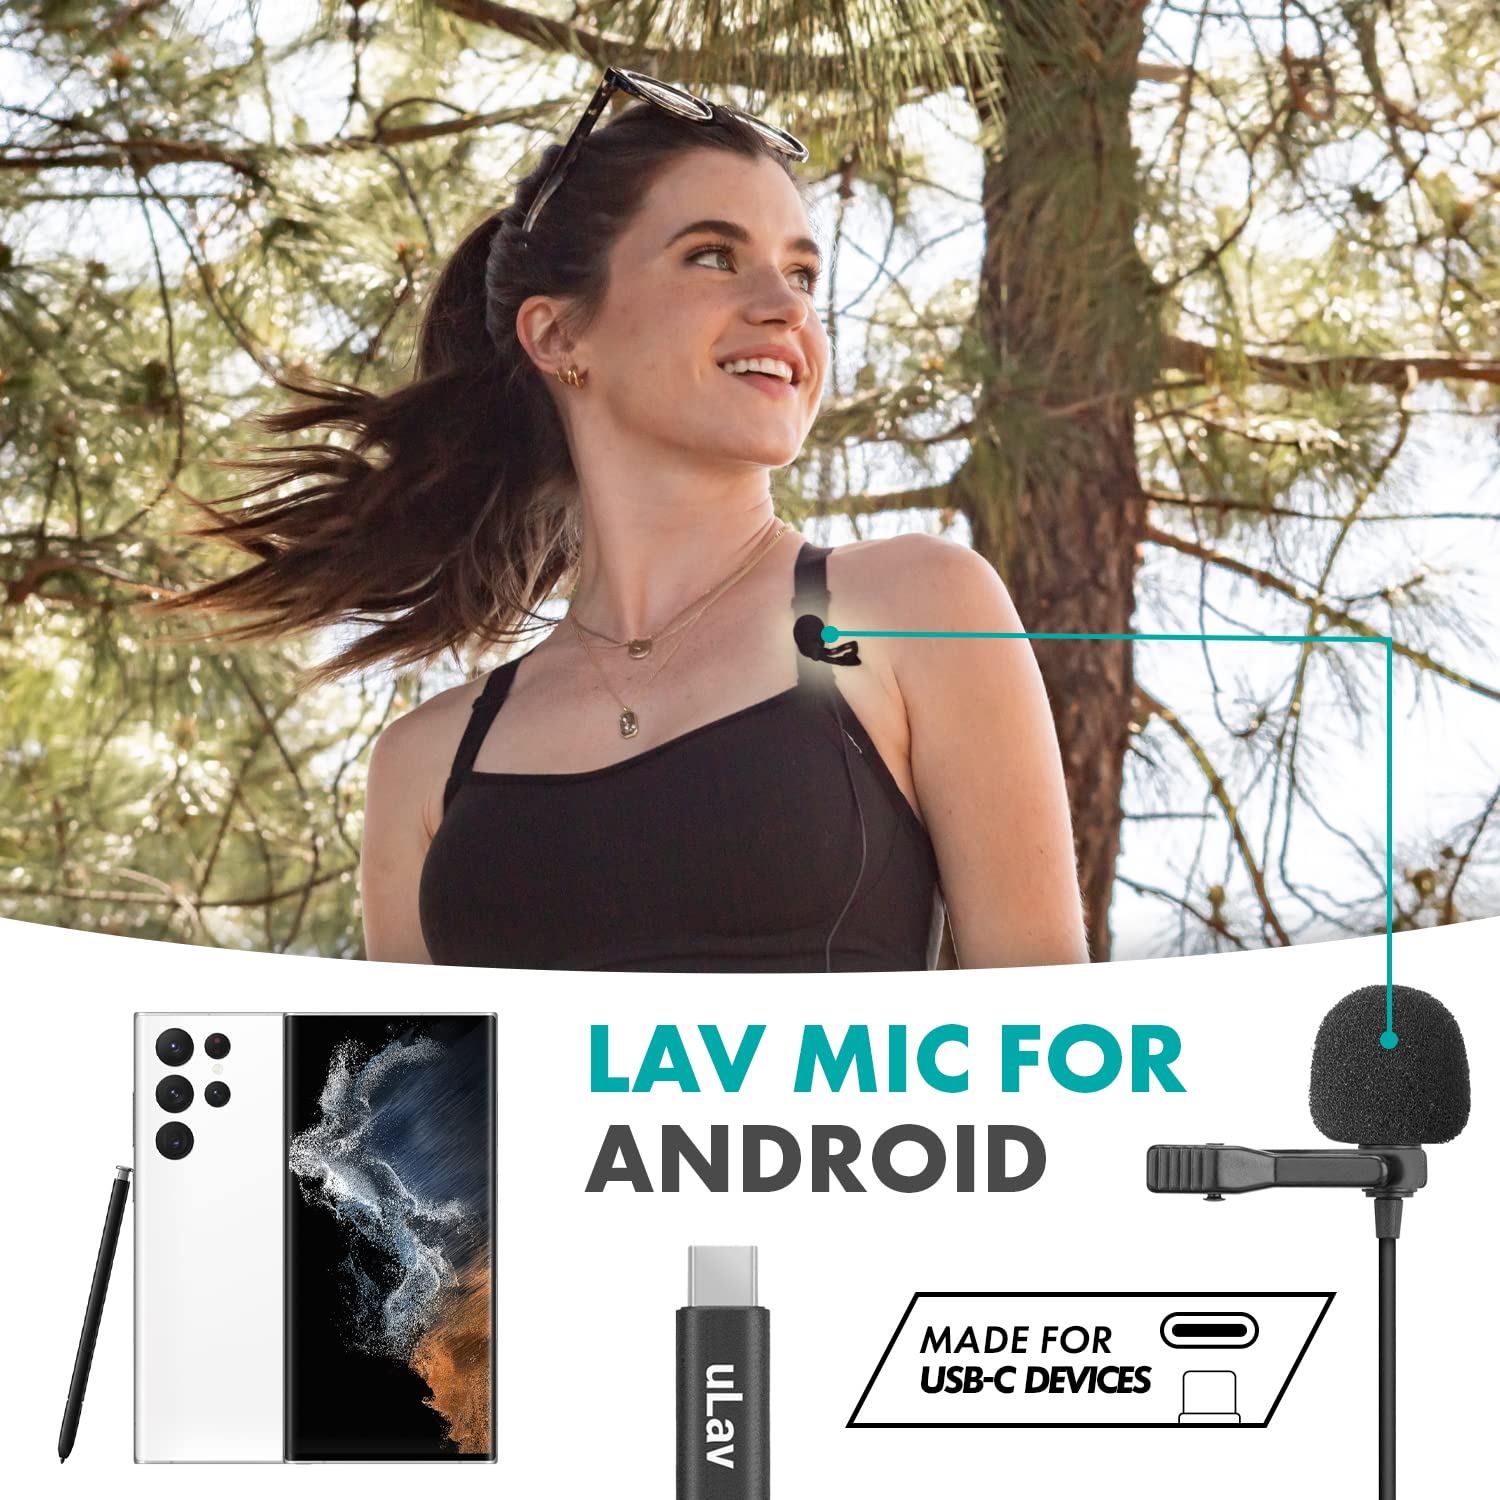 Movo uLav - Wired Omnidirectional USB-C Lavalier Clip On Microphone - External Clip On Mic for Android Smartphone, iPad Pro, USB Type-C Devices - Lapel Microphone for YouTube, Vlogging, Interviews  - Like New